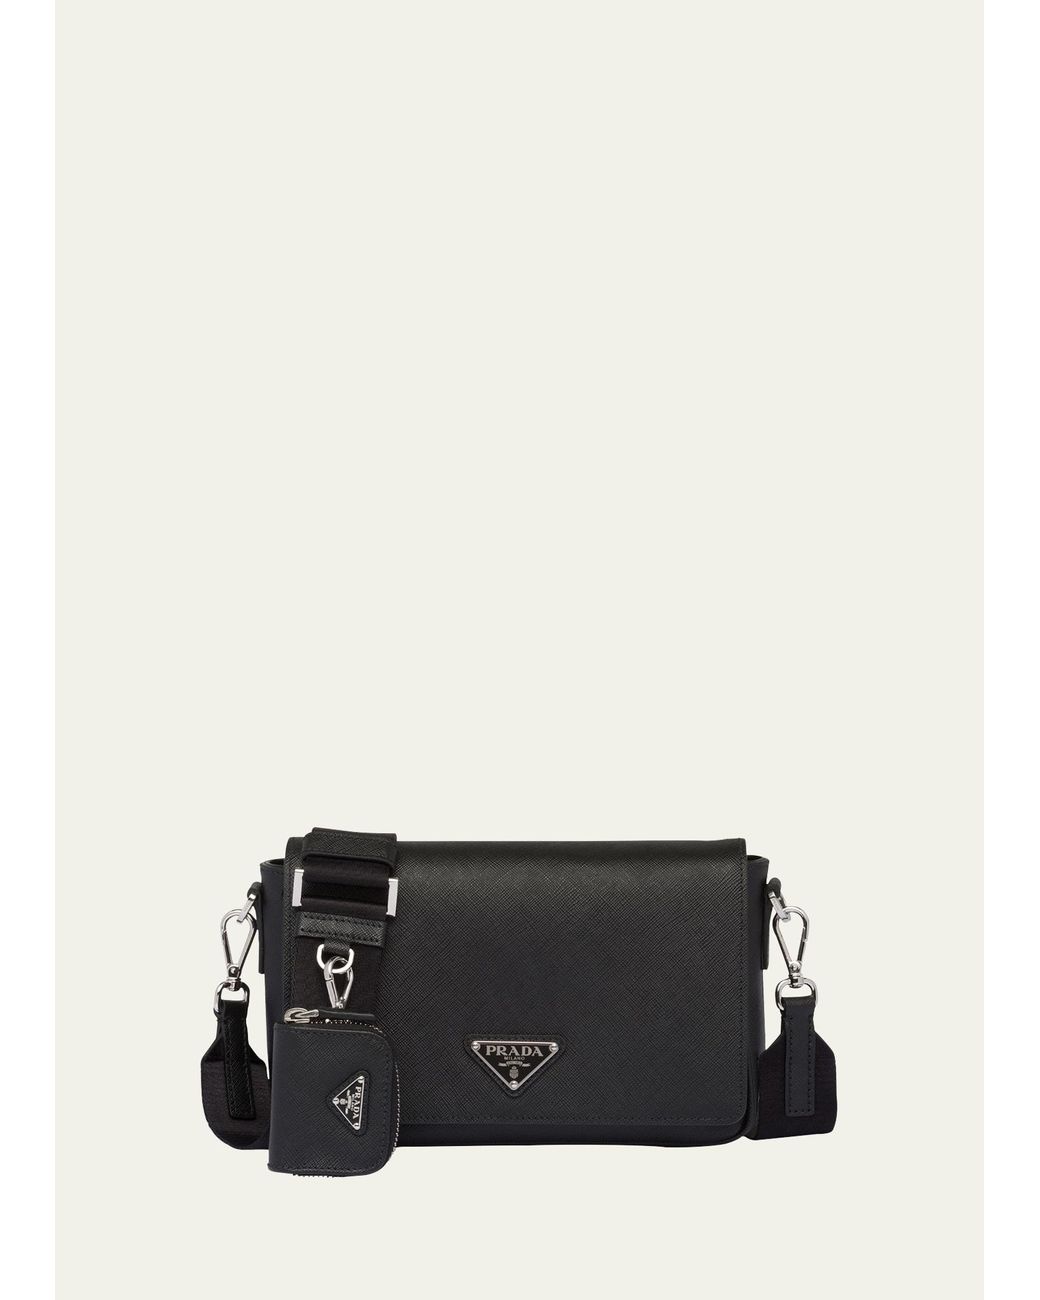 Prada Men's Saffiano Leather Crossbody Bag with Pouch, F03hh Marmo N, Men's, Crossbody Bags Messenger Bags & Camera Bags